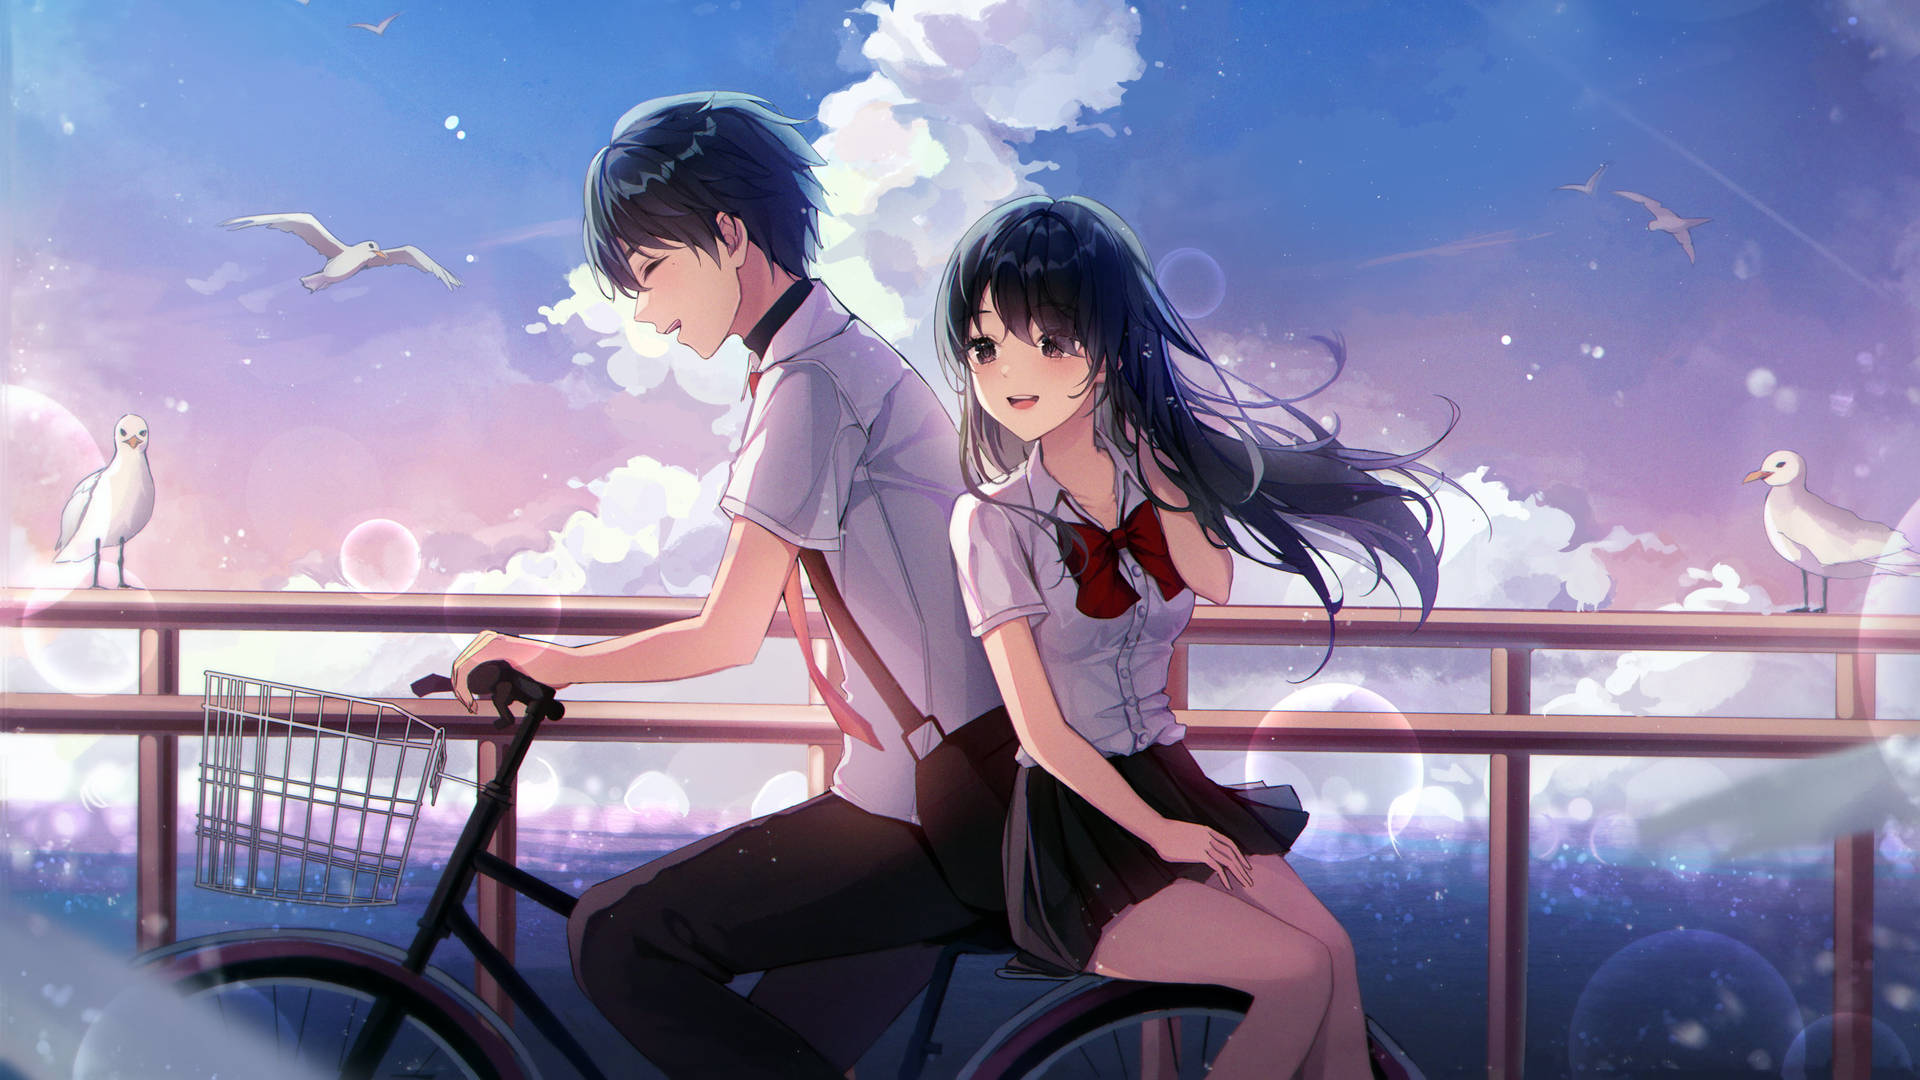 Cute Anime Couple Sharing A Bicycle Background